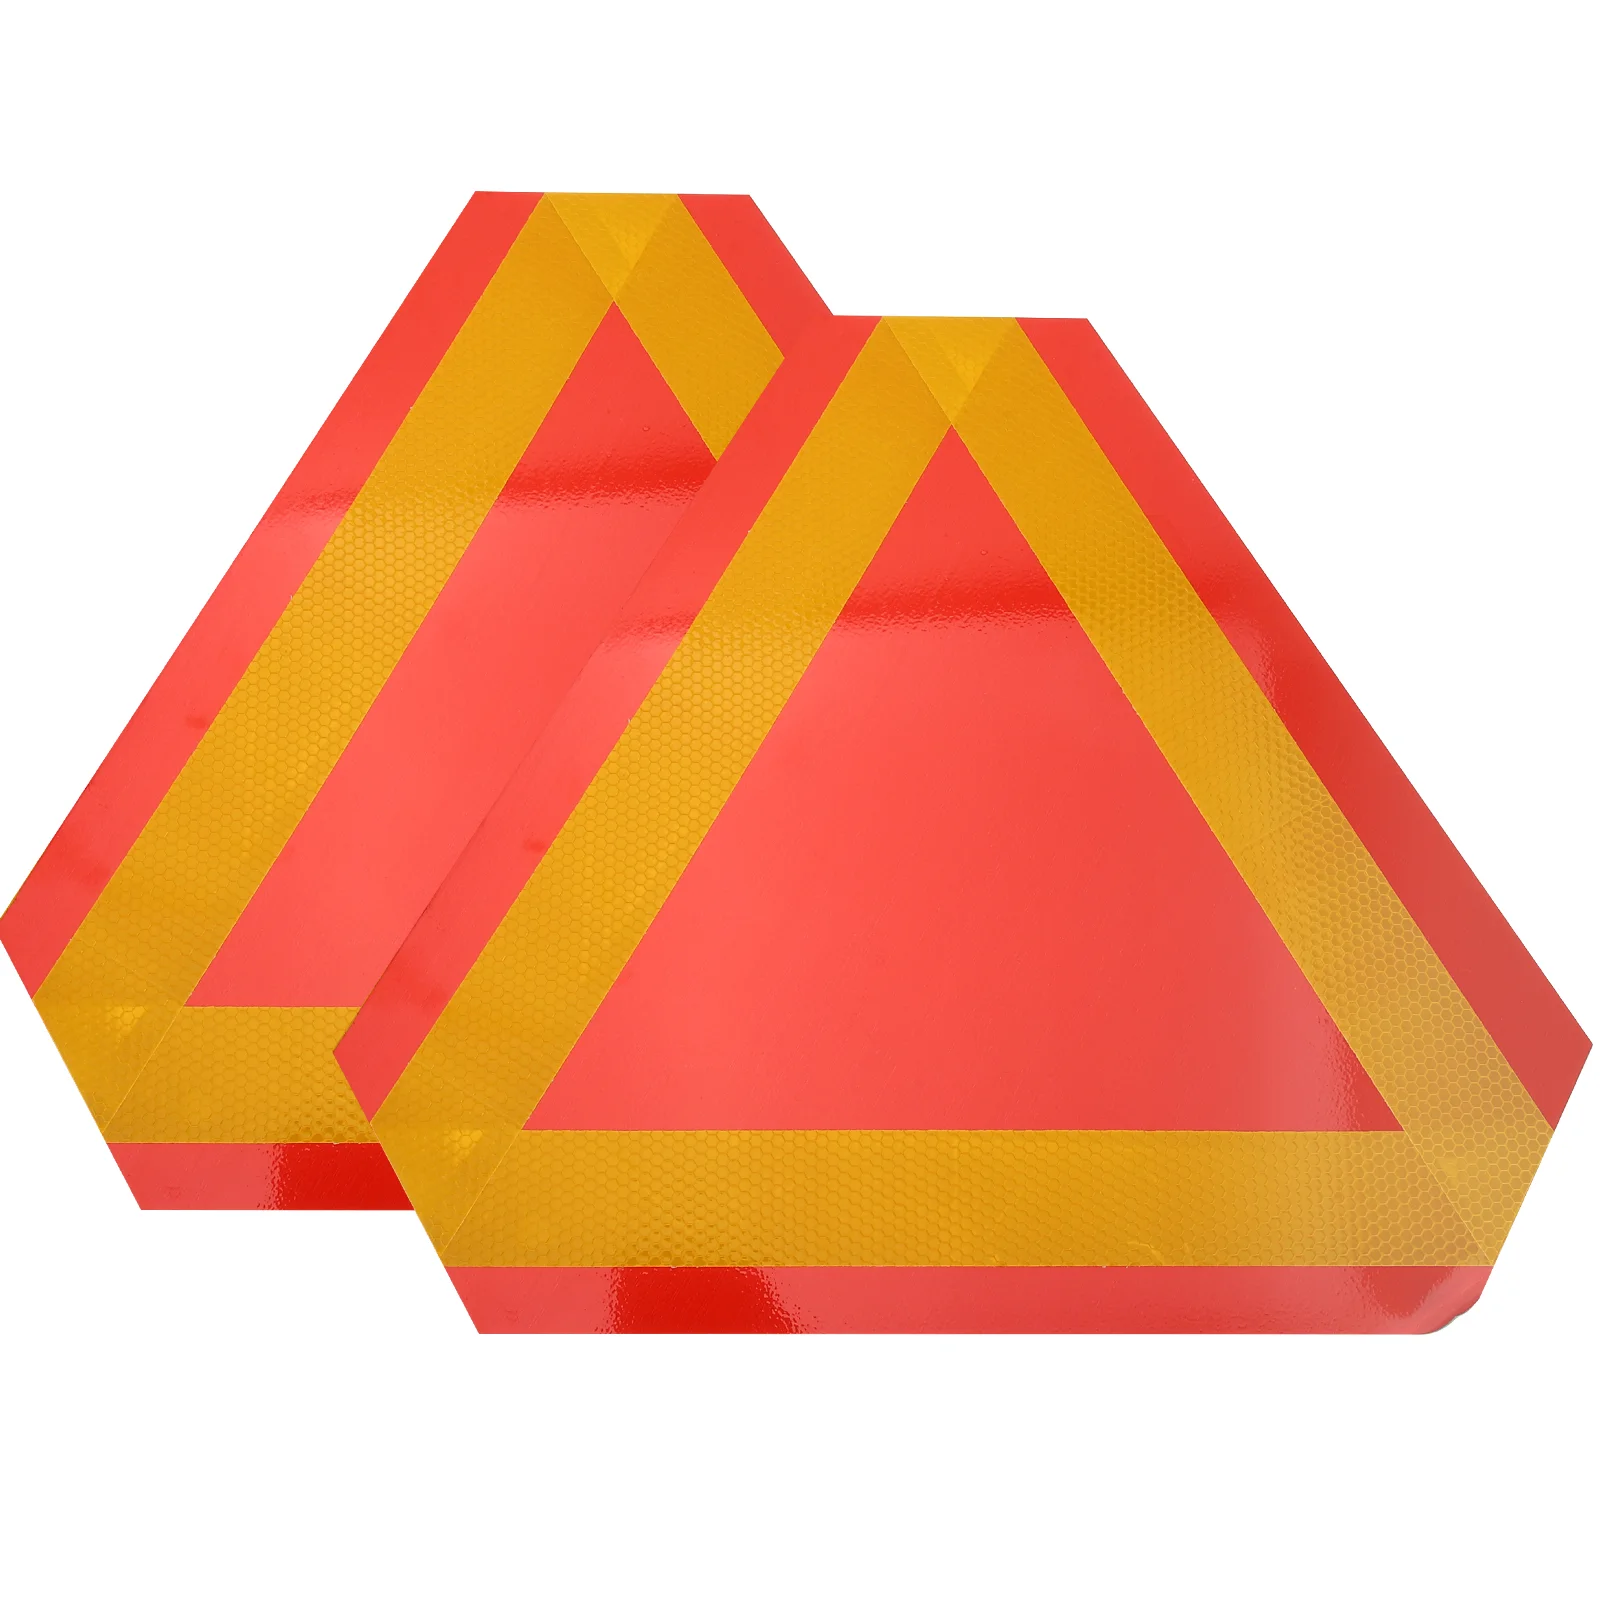 

2 Pcs Triangular Reflector Car Slow Moving Triangle Warning Sign Aluminum Plate Vehicle Signs Reflectors Safety